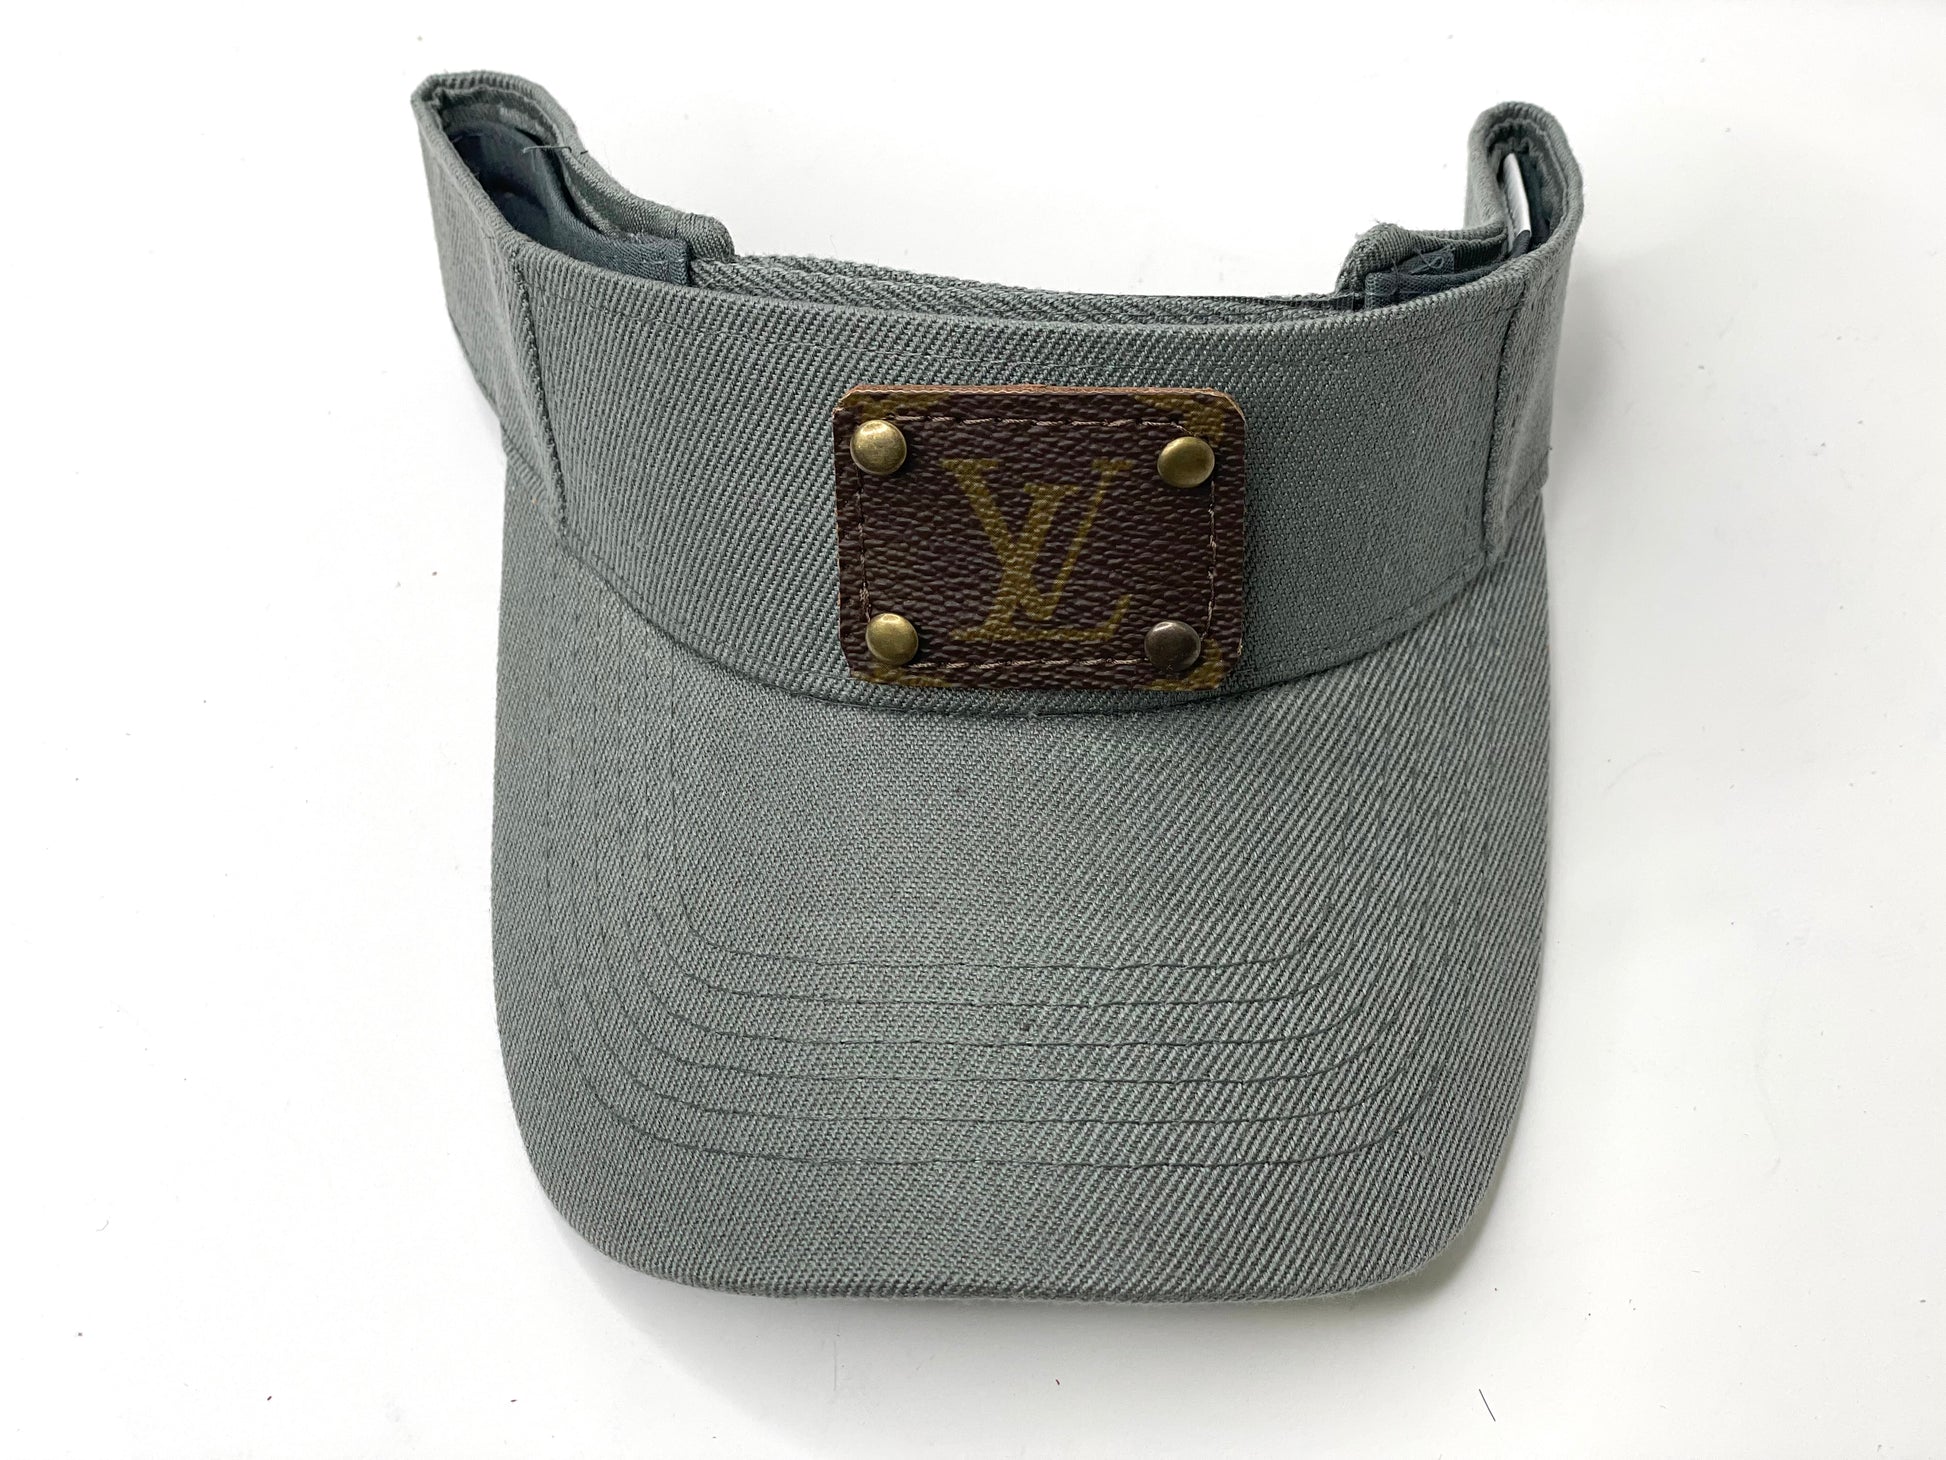 ZZ18- Dark grey Visor Antique Hardware - Patches Of Upcycling